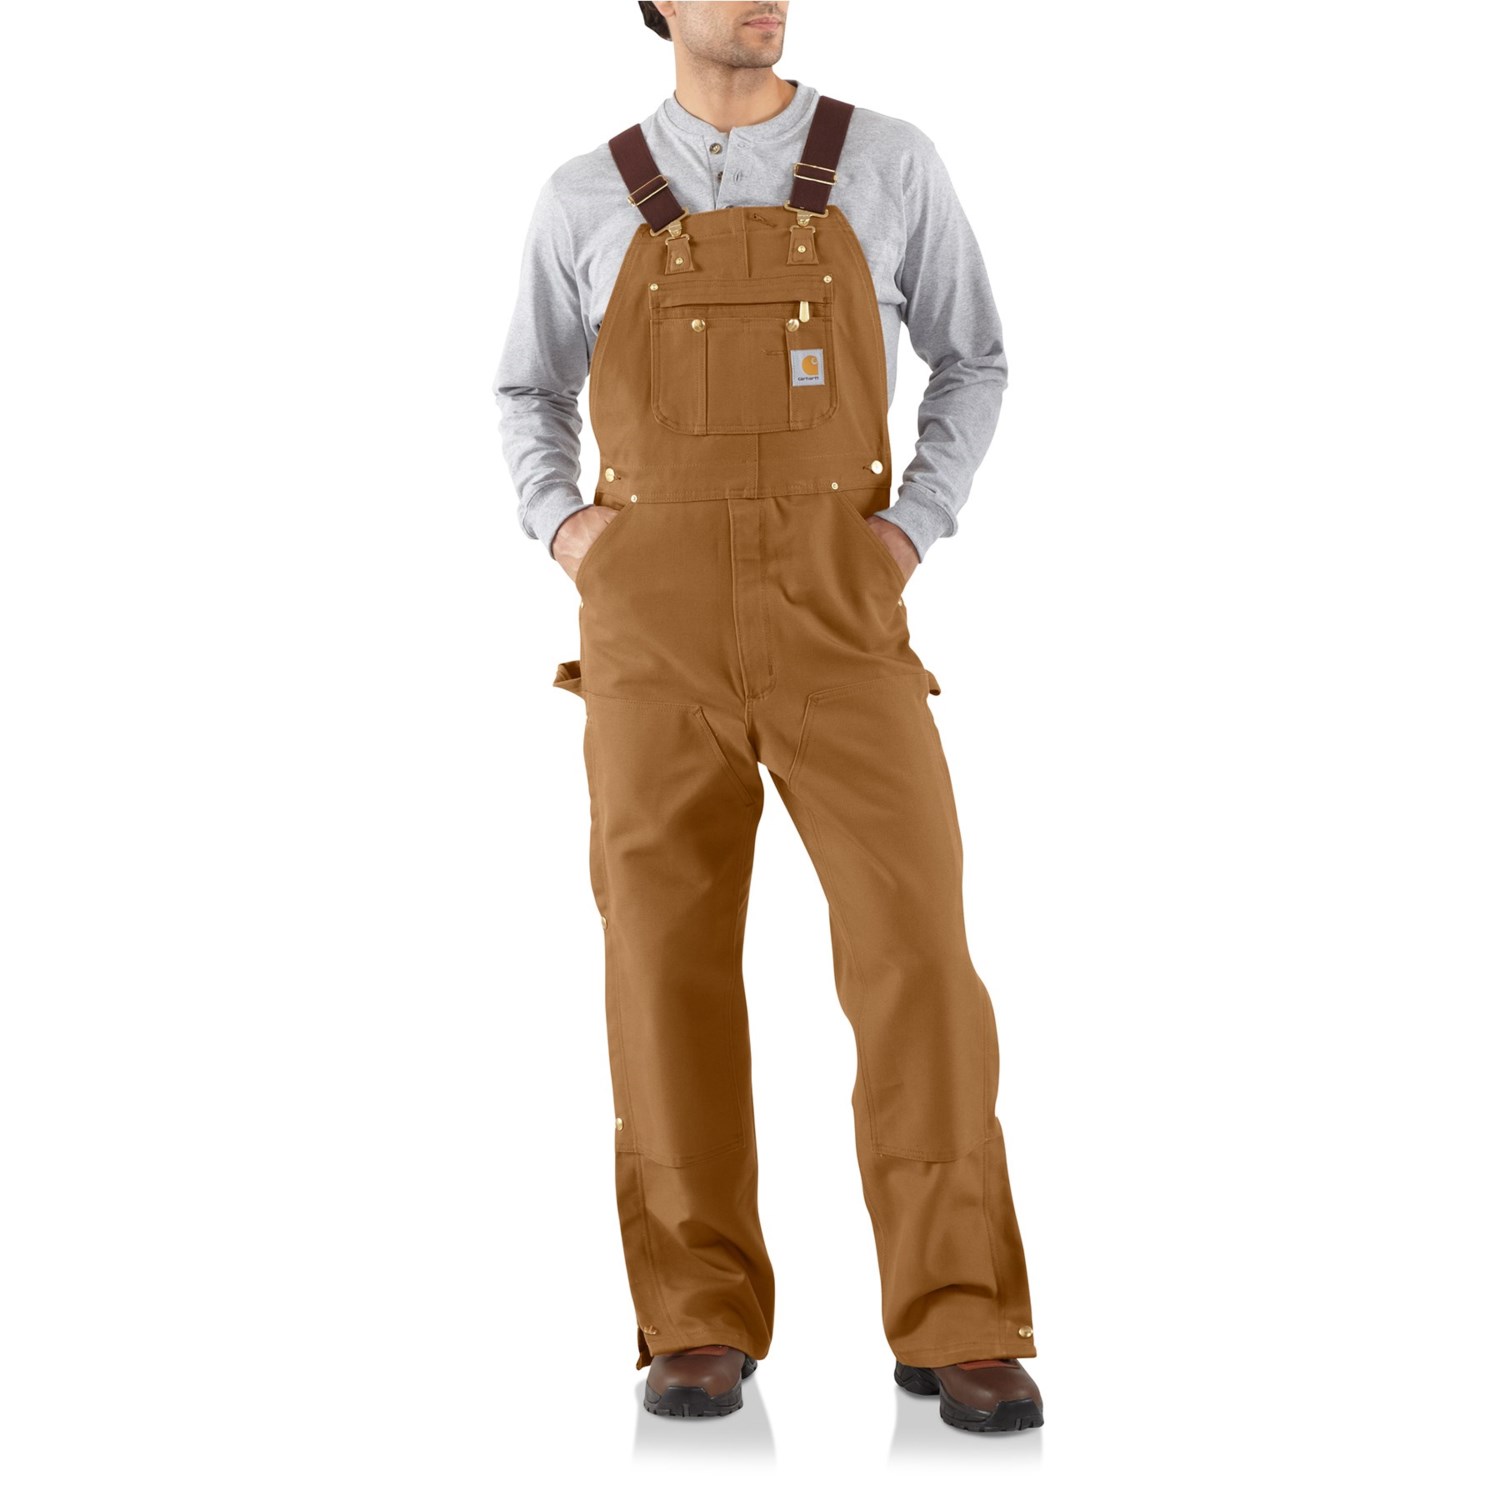 Carhartt R37 Zip-to-Thigh Bib Overalls - Unlined, Factory Seconds